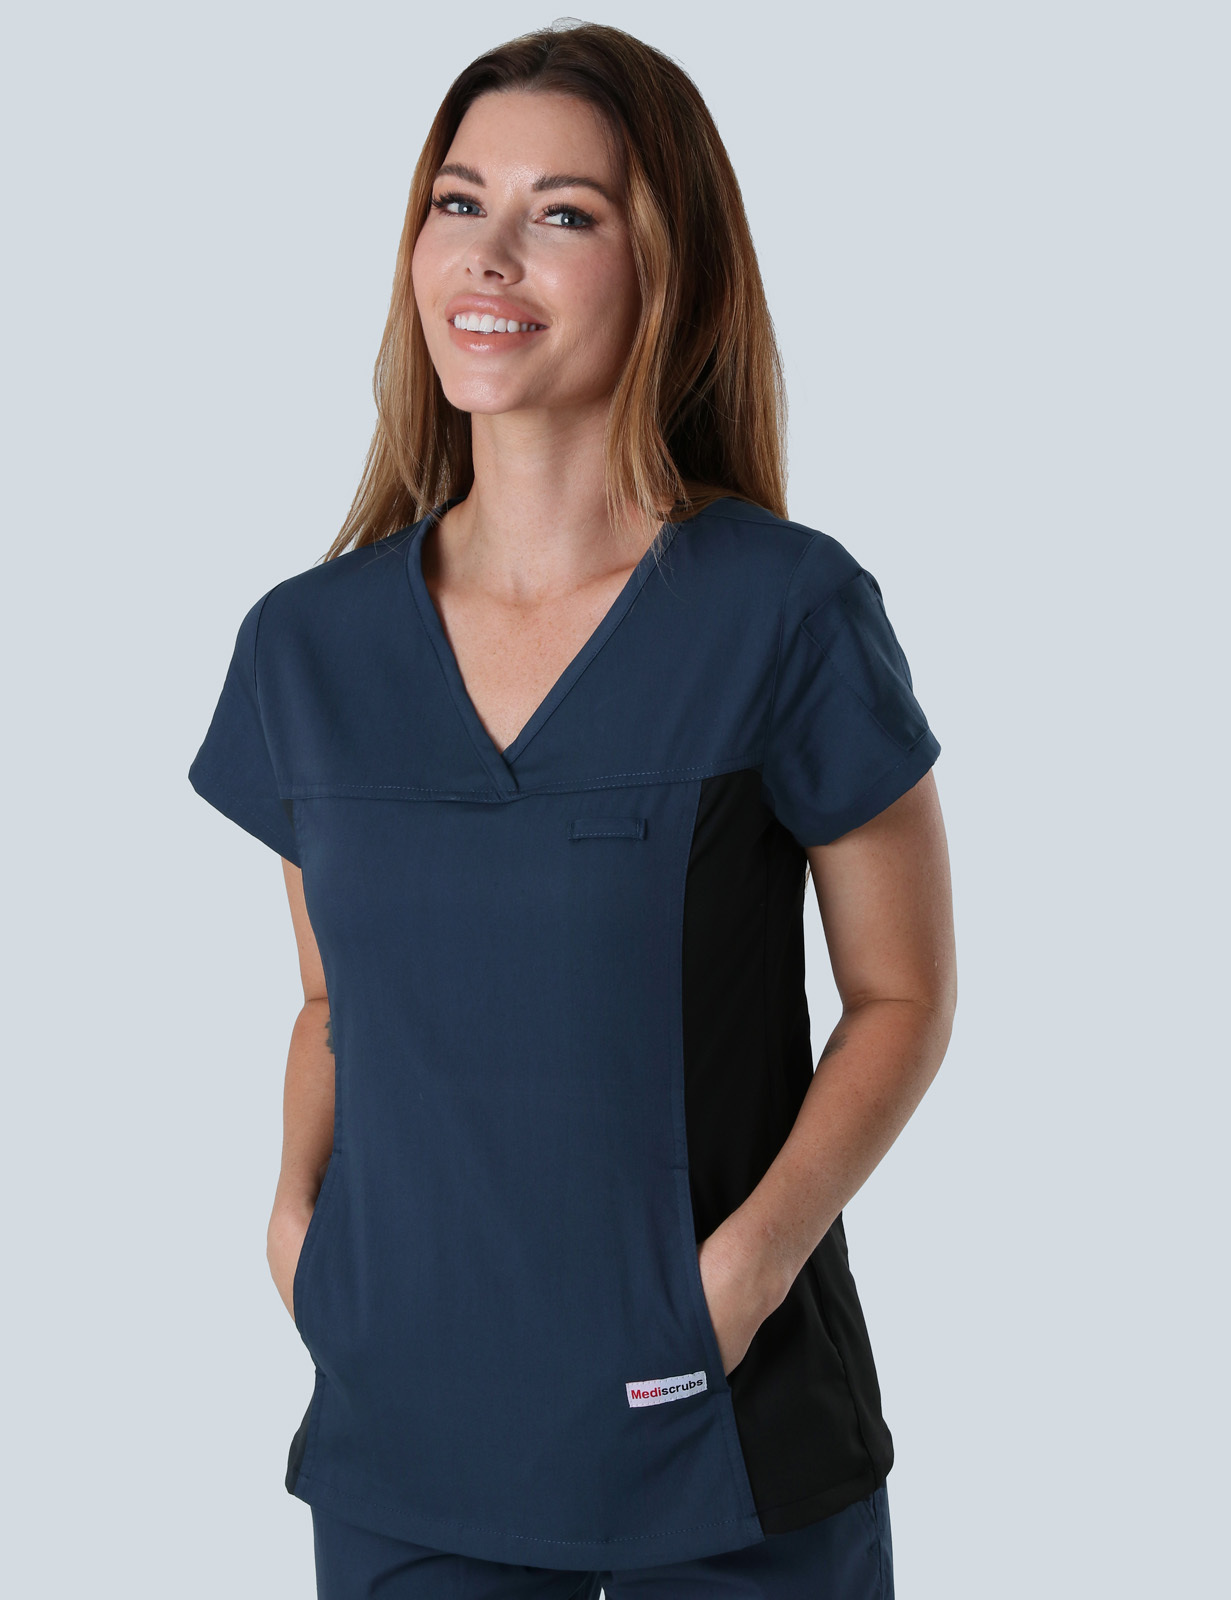 Ashmore Retreat Registered Nurse Top Only Bundle (Women's Fit Spandex in Navy incl Logo) 